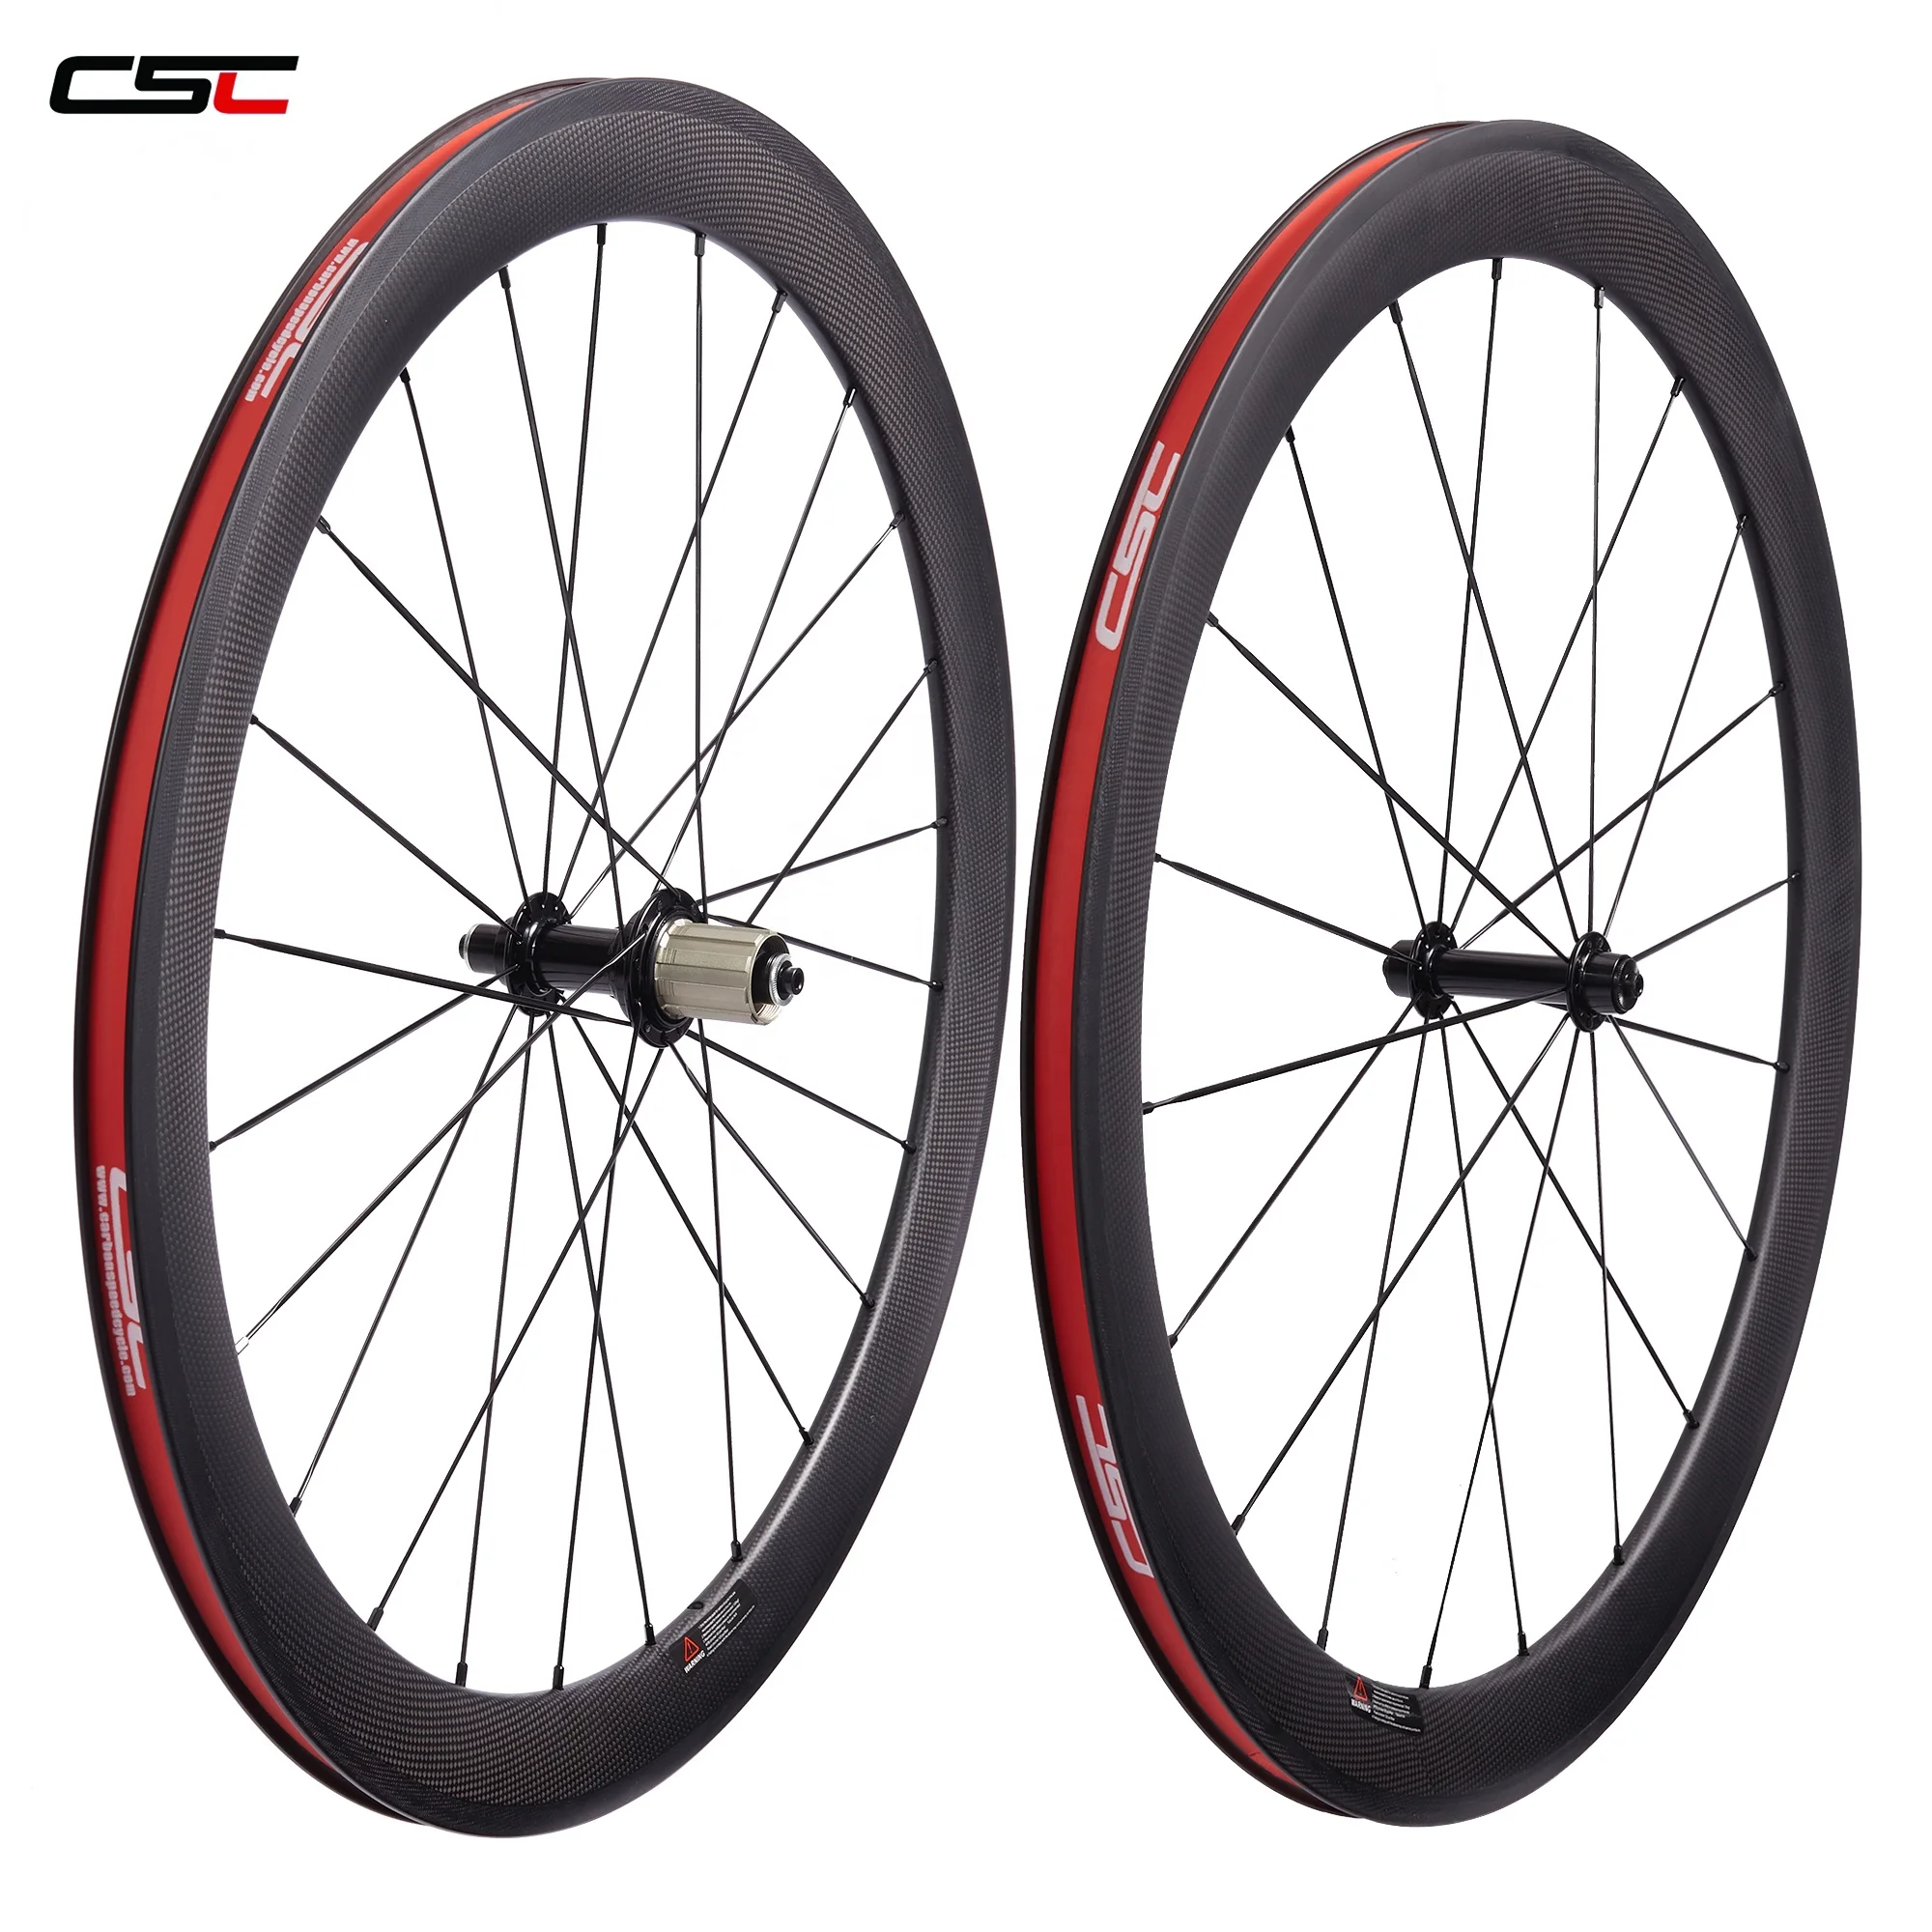 

ultra light Road bike carbon wheels clincher 50mm 25mm width bicycle carbon wheelsets with Powerway R13 hub and Pillar spoke